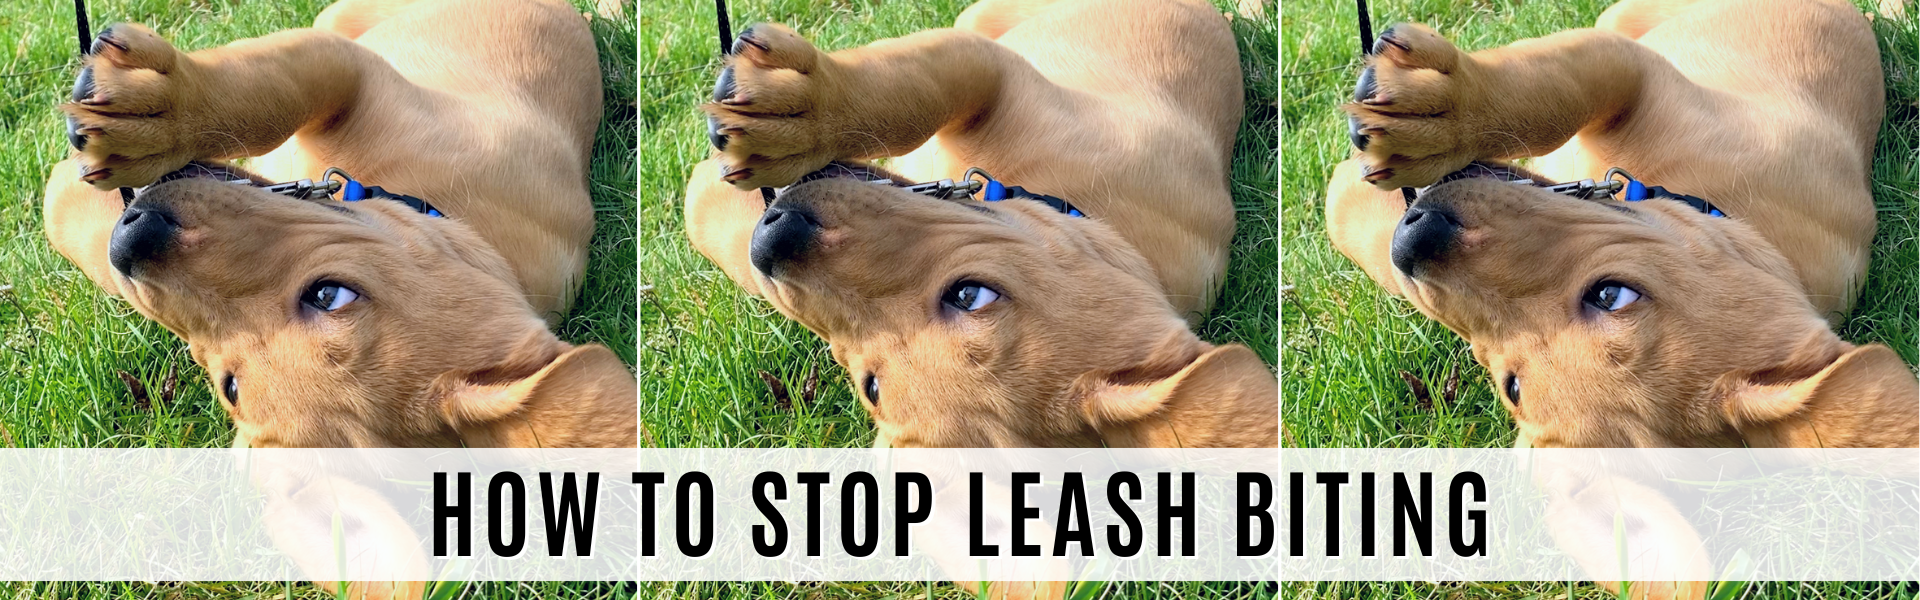 how to stop leash biting